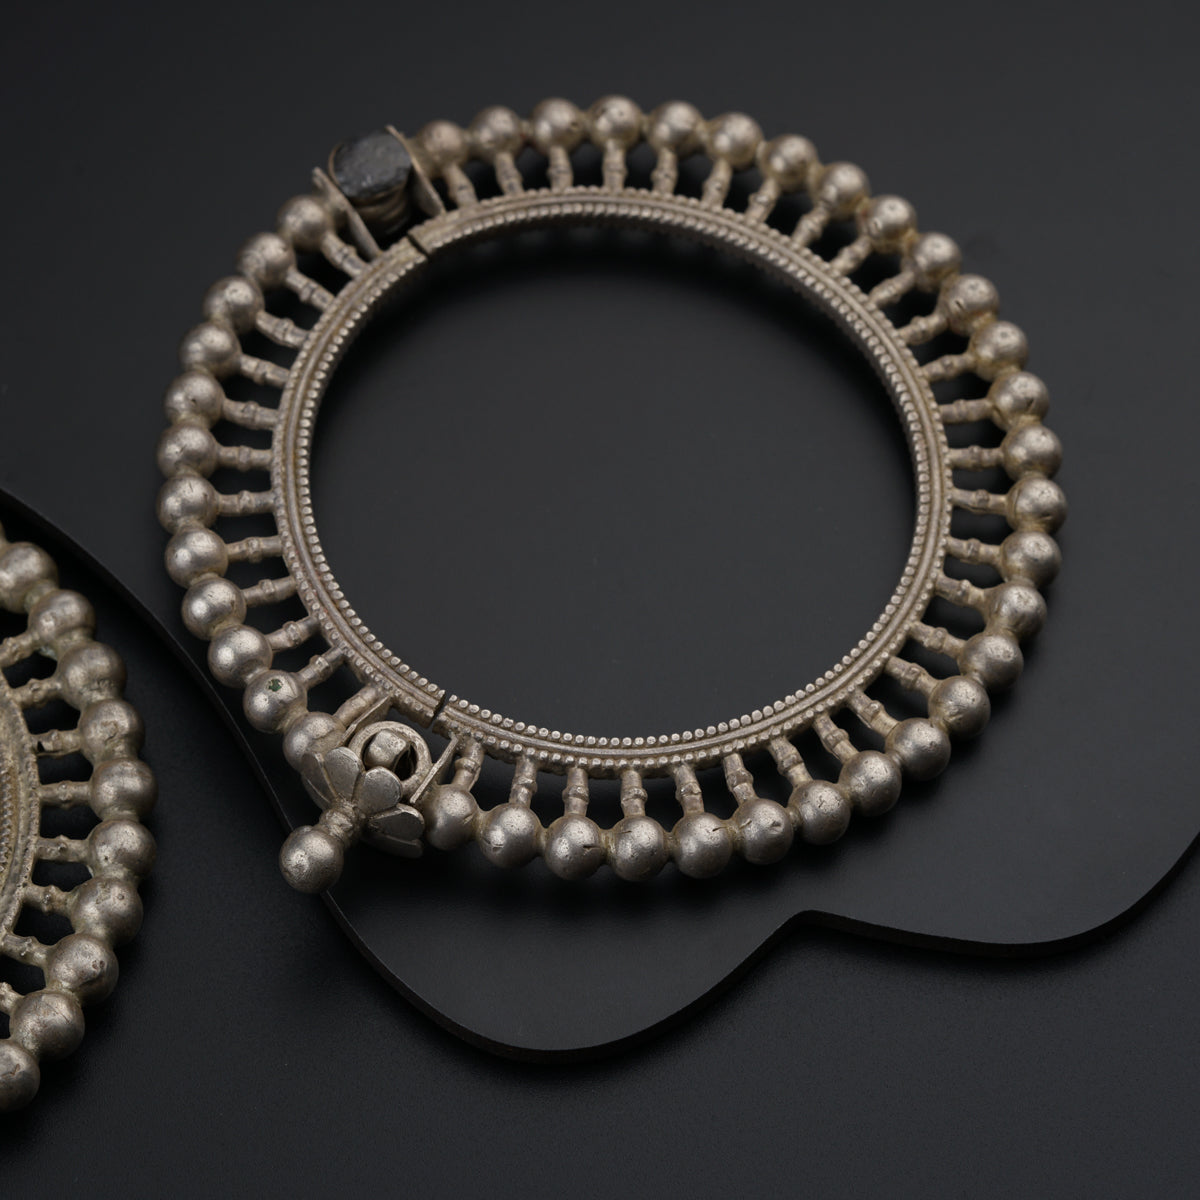 a pair of silver bracelets on a black surface